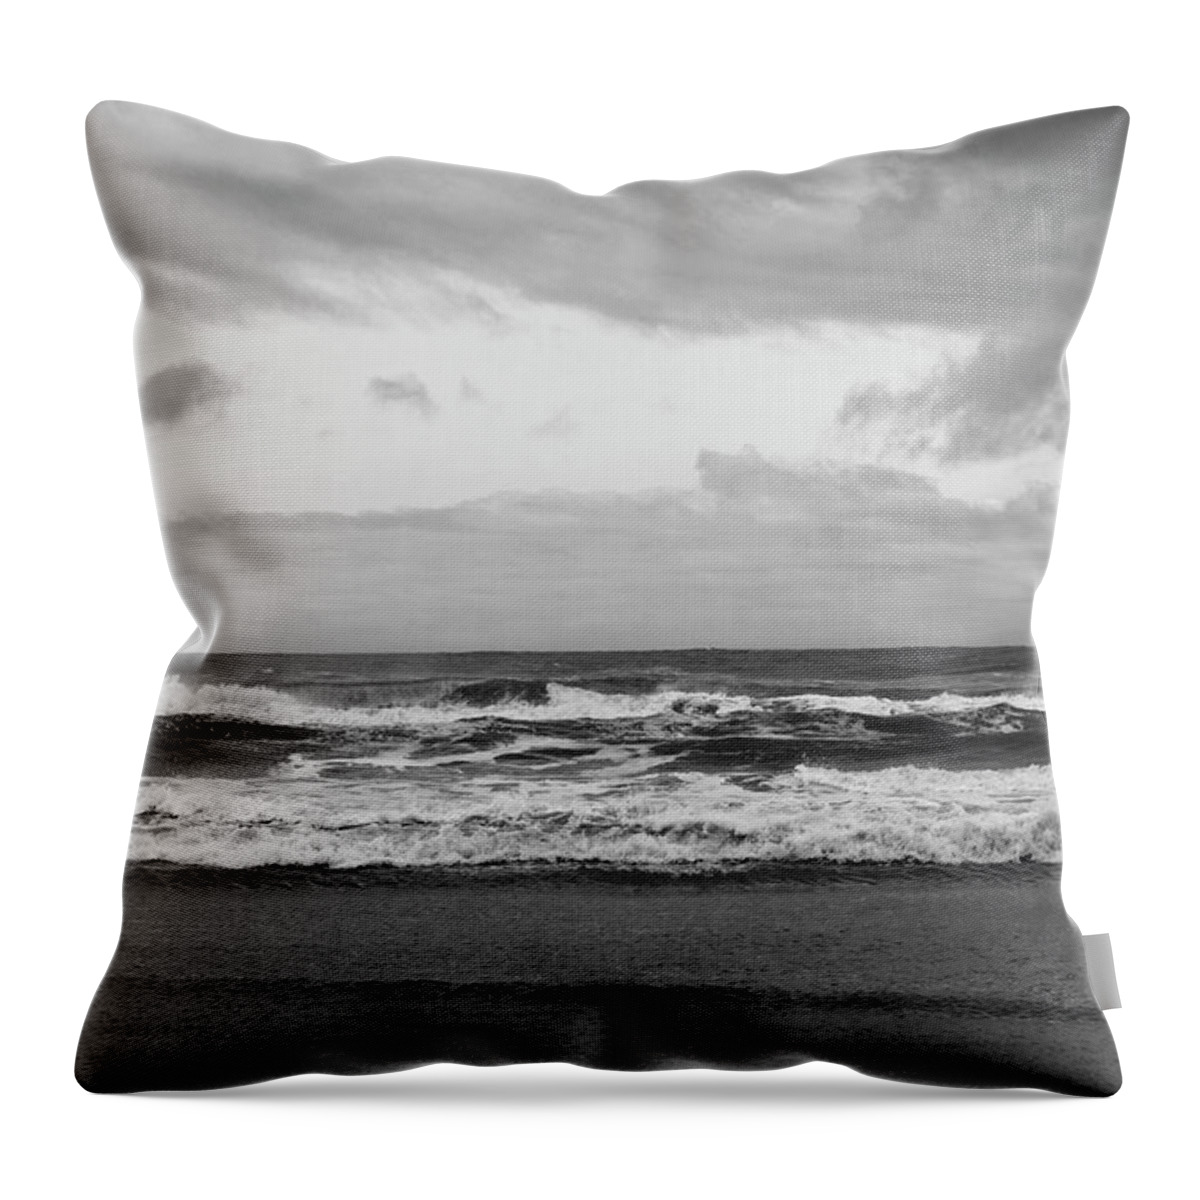 Ocean Waves Throw Pillow featuring the photograph Assiduously by Gina Cinardo